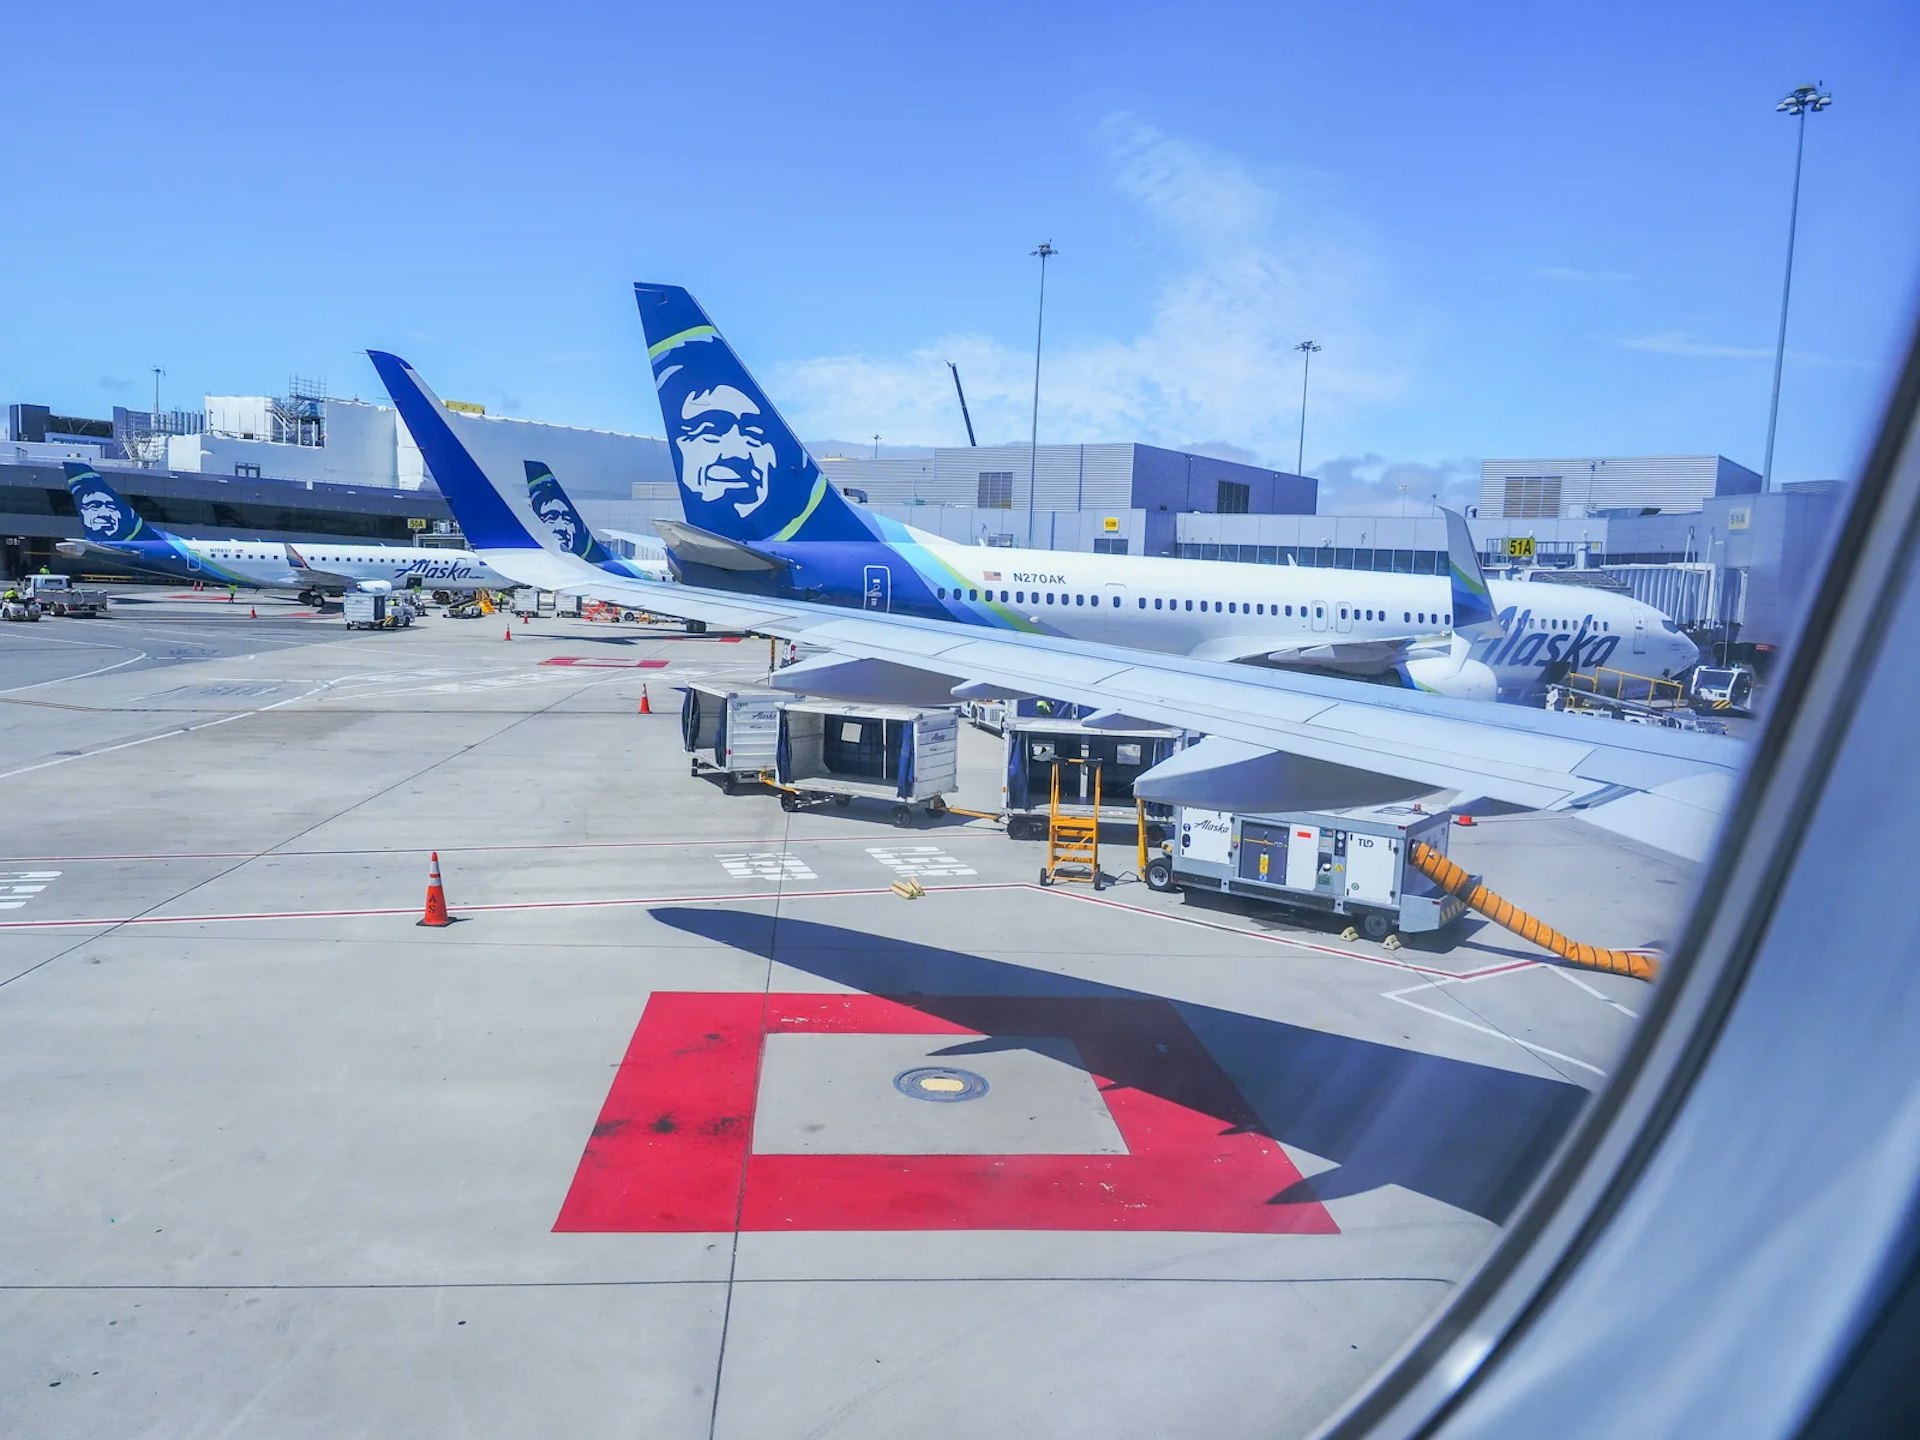 The view from inside an Alaska Airlines plane